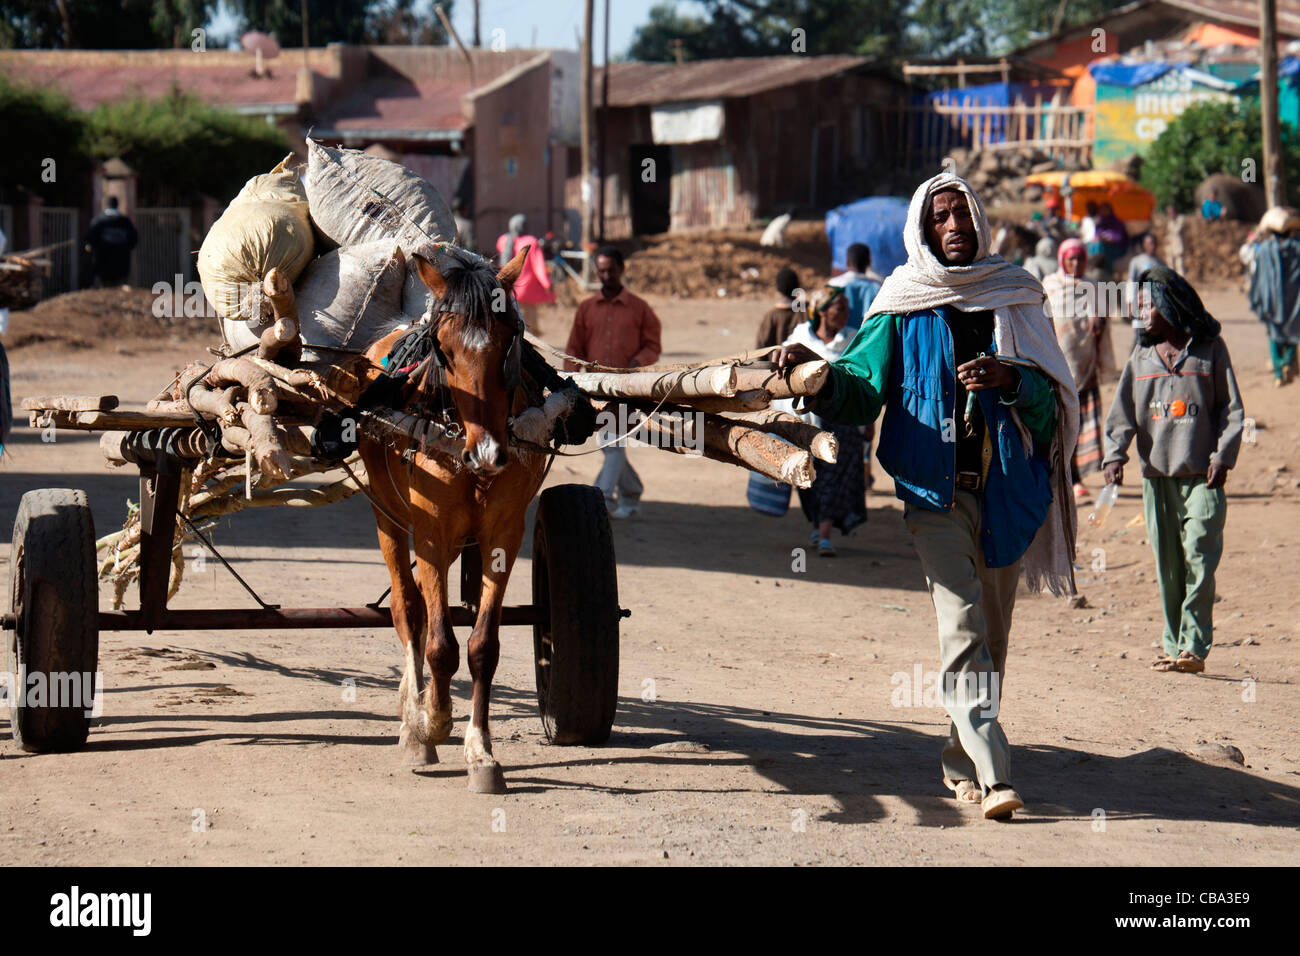 Typical street scene at the town of Debark on the edge of the Simien Mountain National Park in Northern Ethiopia, Africa. Stock Photo